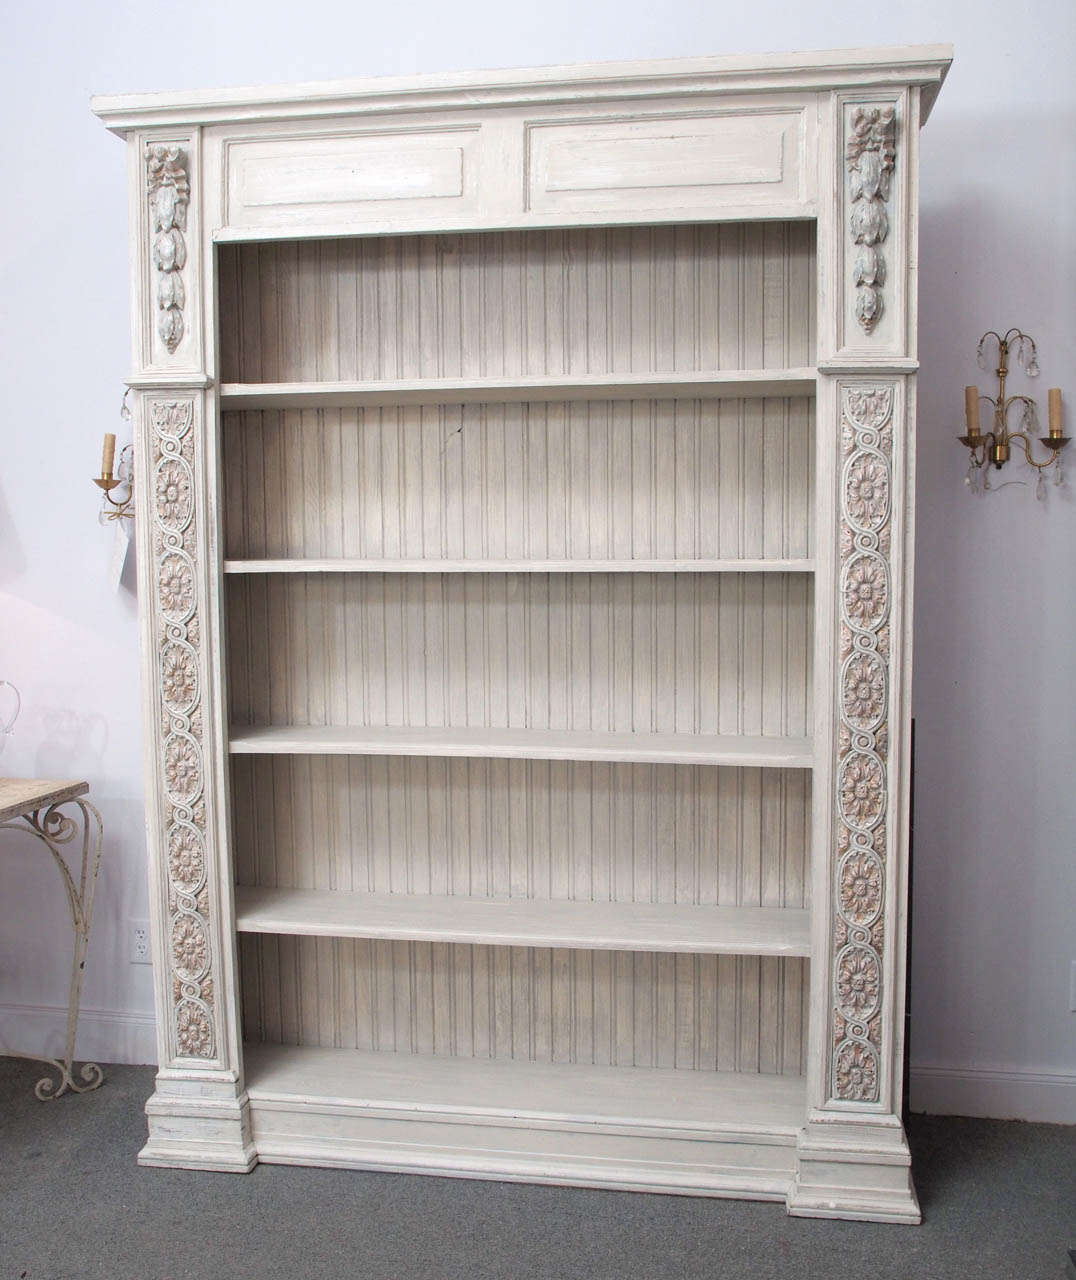 19th century Italian library case containing six shelves. Decoratively carved panels line each side; the finish, which has been updated, is distressed paint and worn gilt.